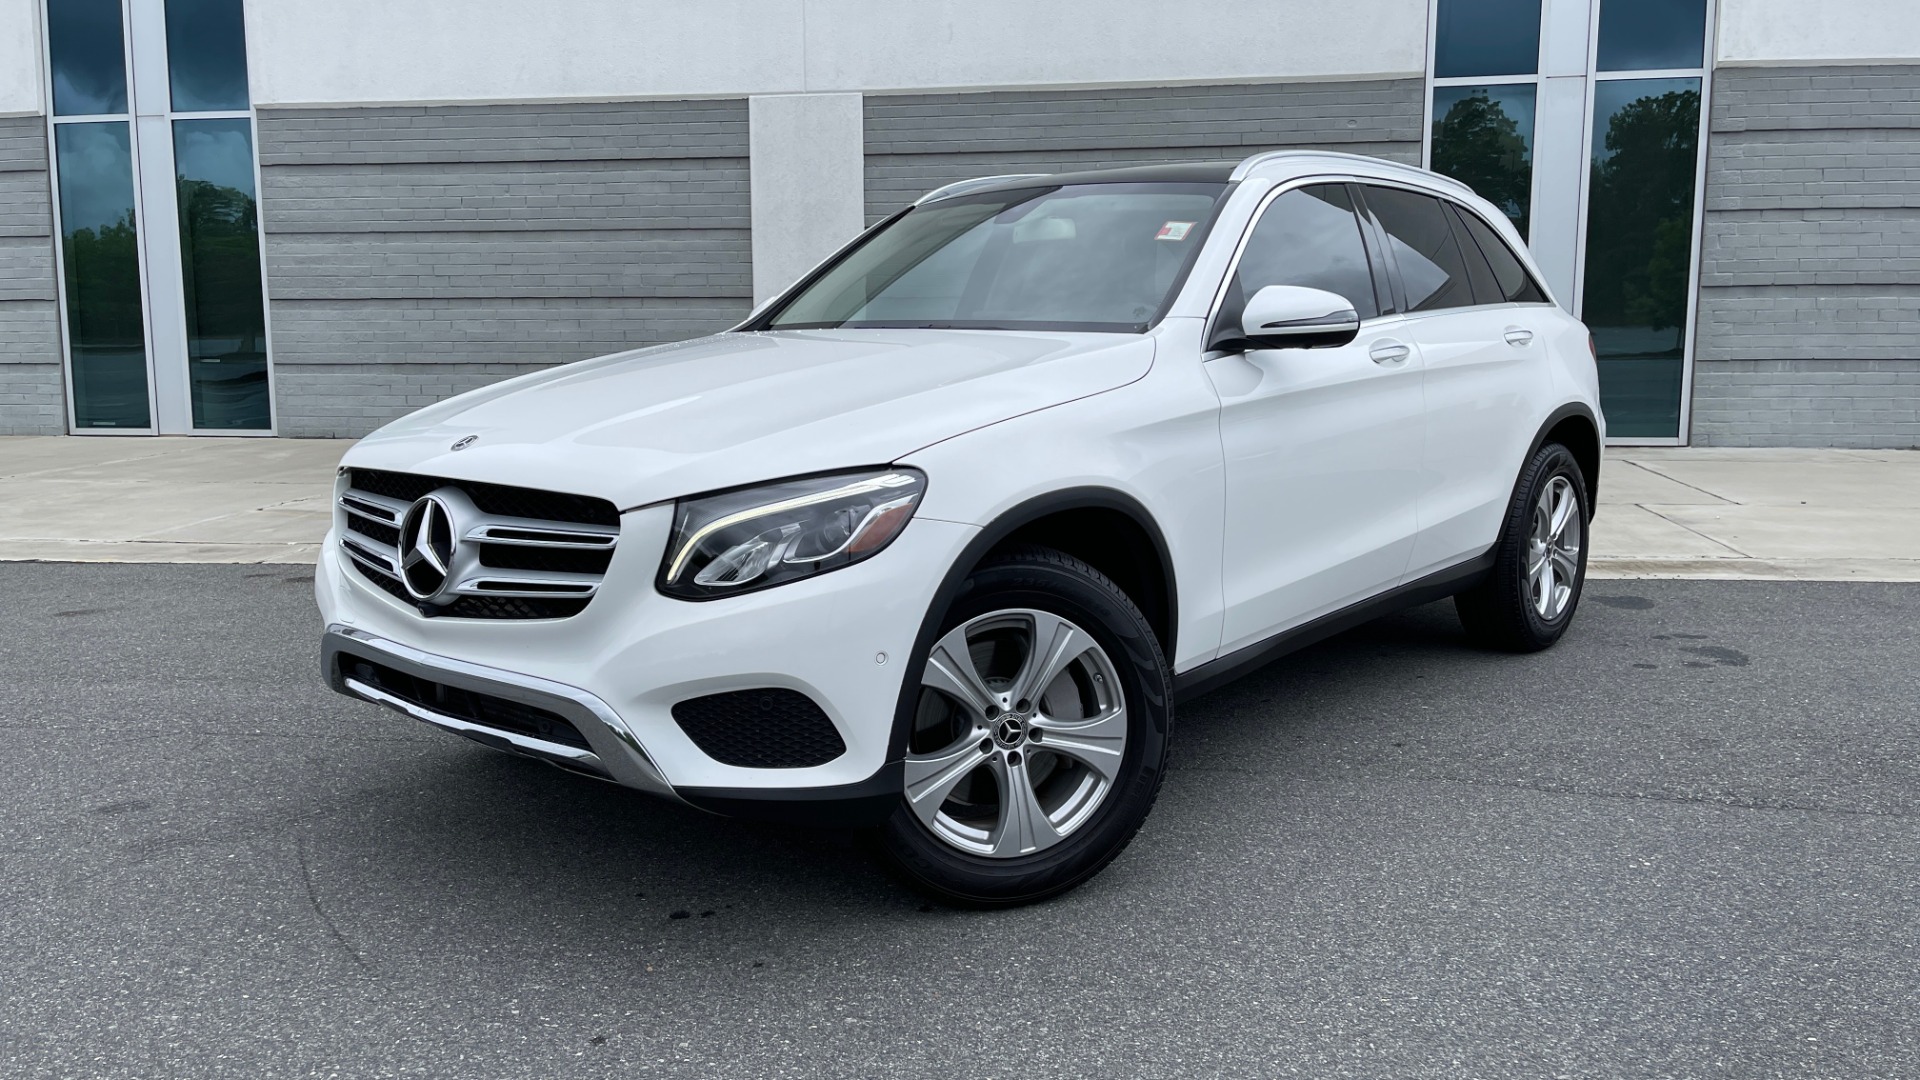 Used 2018 Mercedes-Benz GLC 300 PREMIUM / PANO-ROOF / HTD STS / PARK ASST / REARVIEW for sale Sold at Formula Imports in Charlotte NC 28227 1